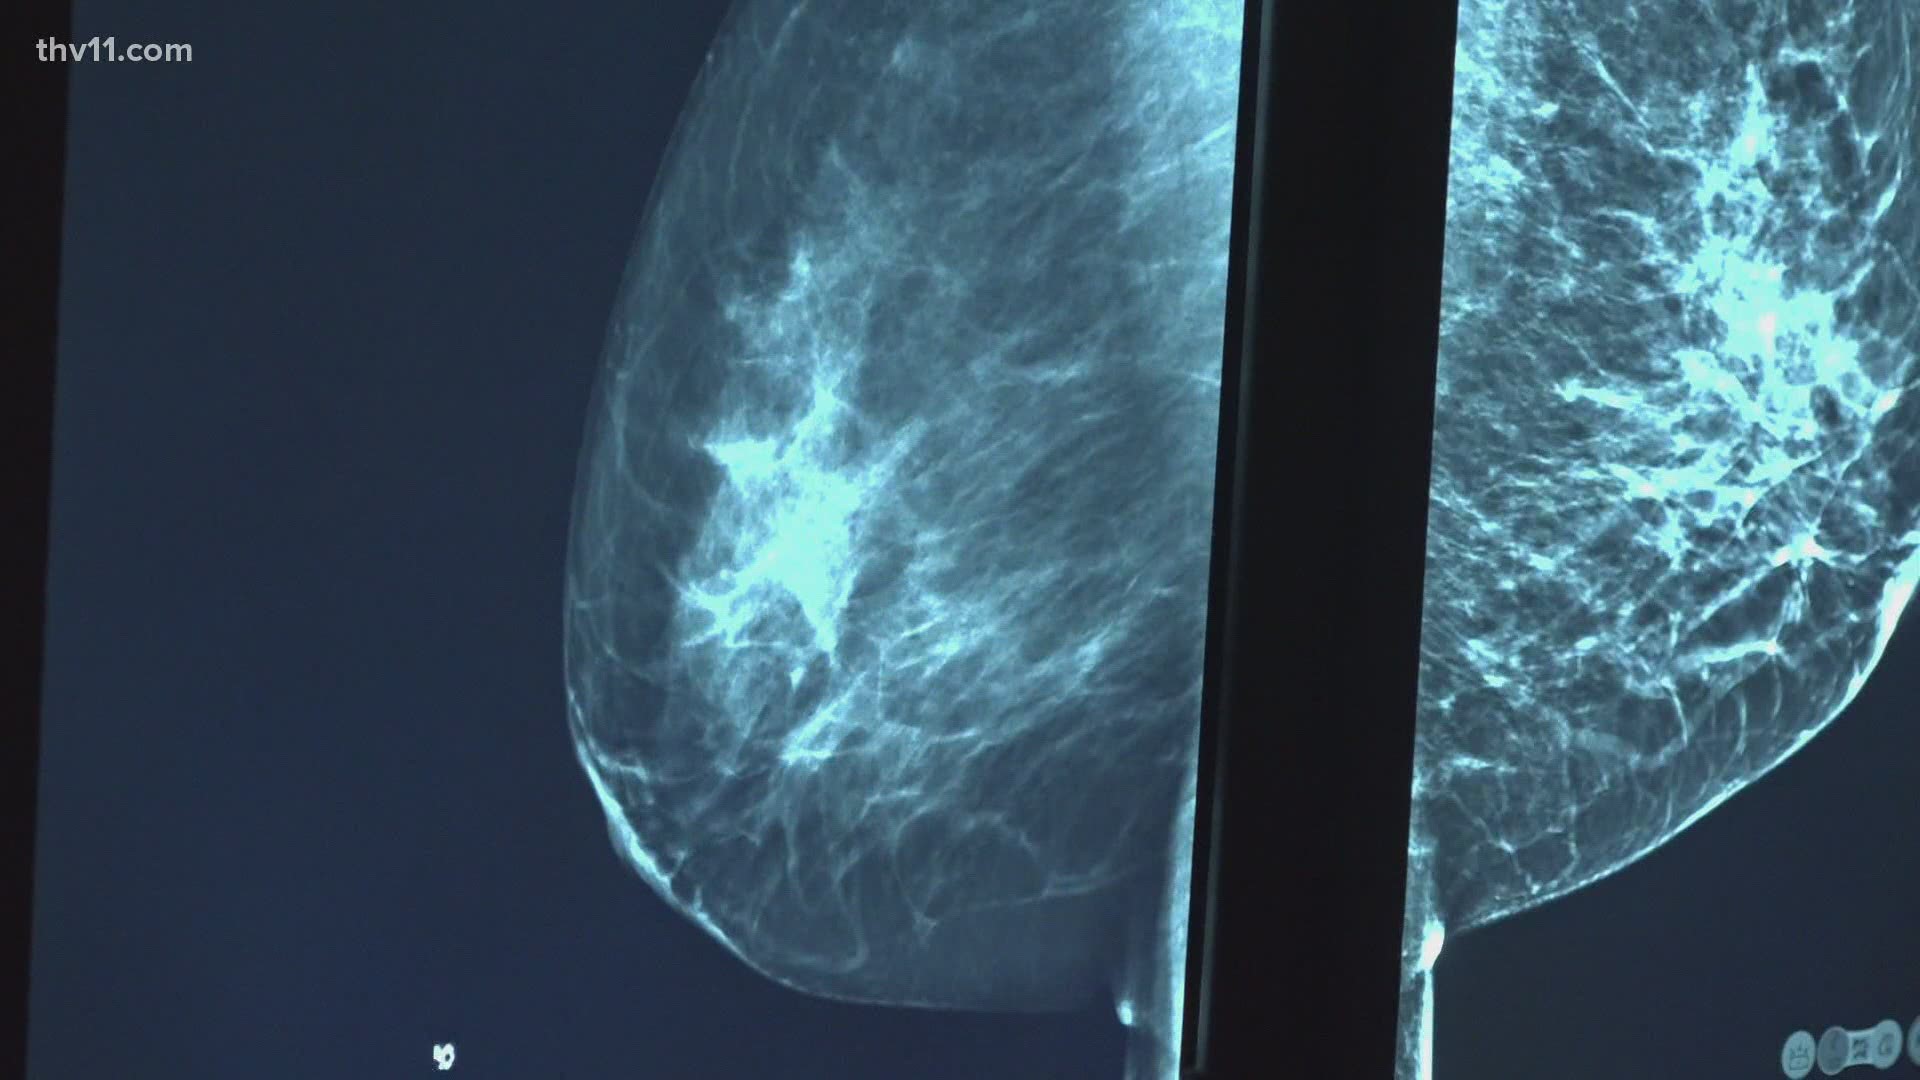 THV11's Craig O'Neill explains why breast cancer screenings shouldn't stop because of COVID-19.